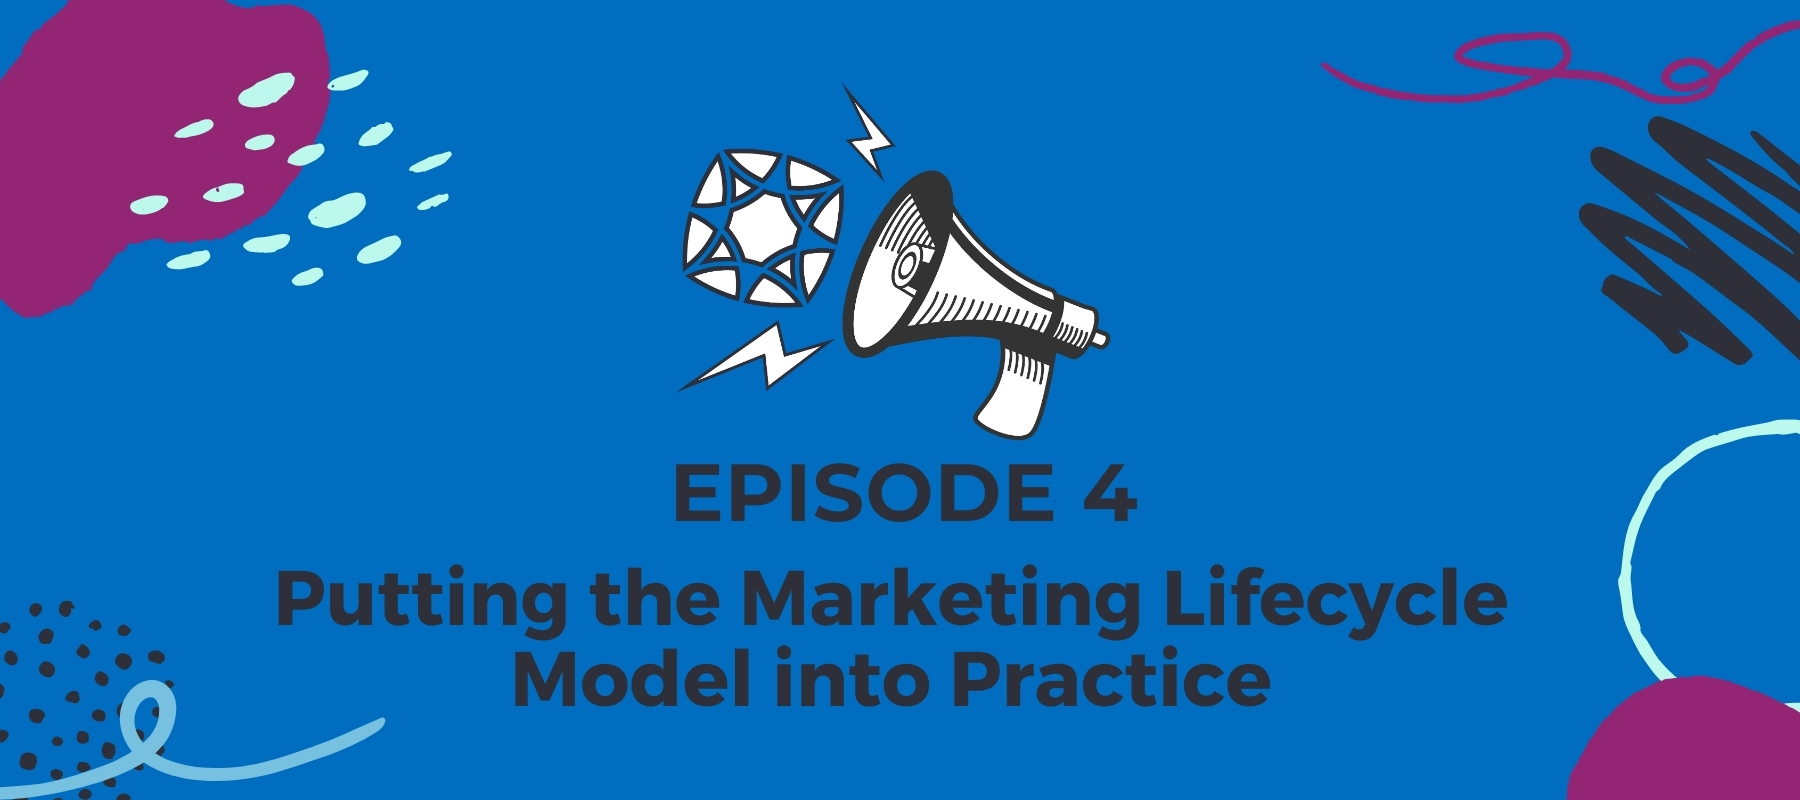 Episode 4: Putting the Marketing Lifestyle Model into Practice